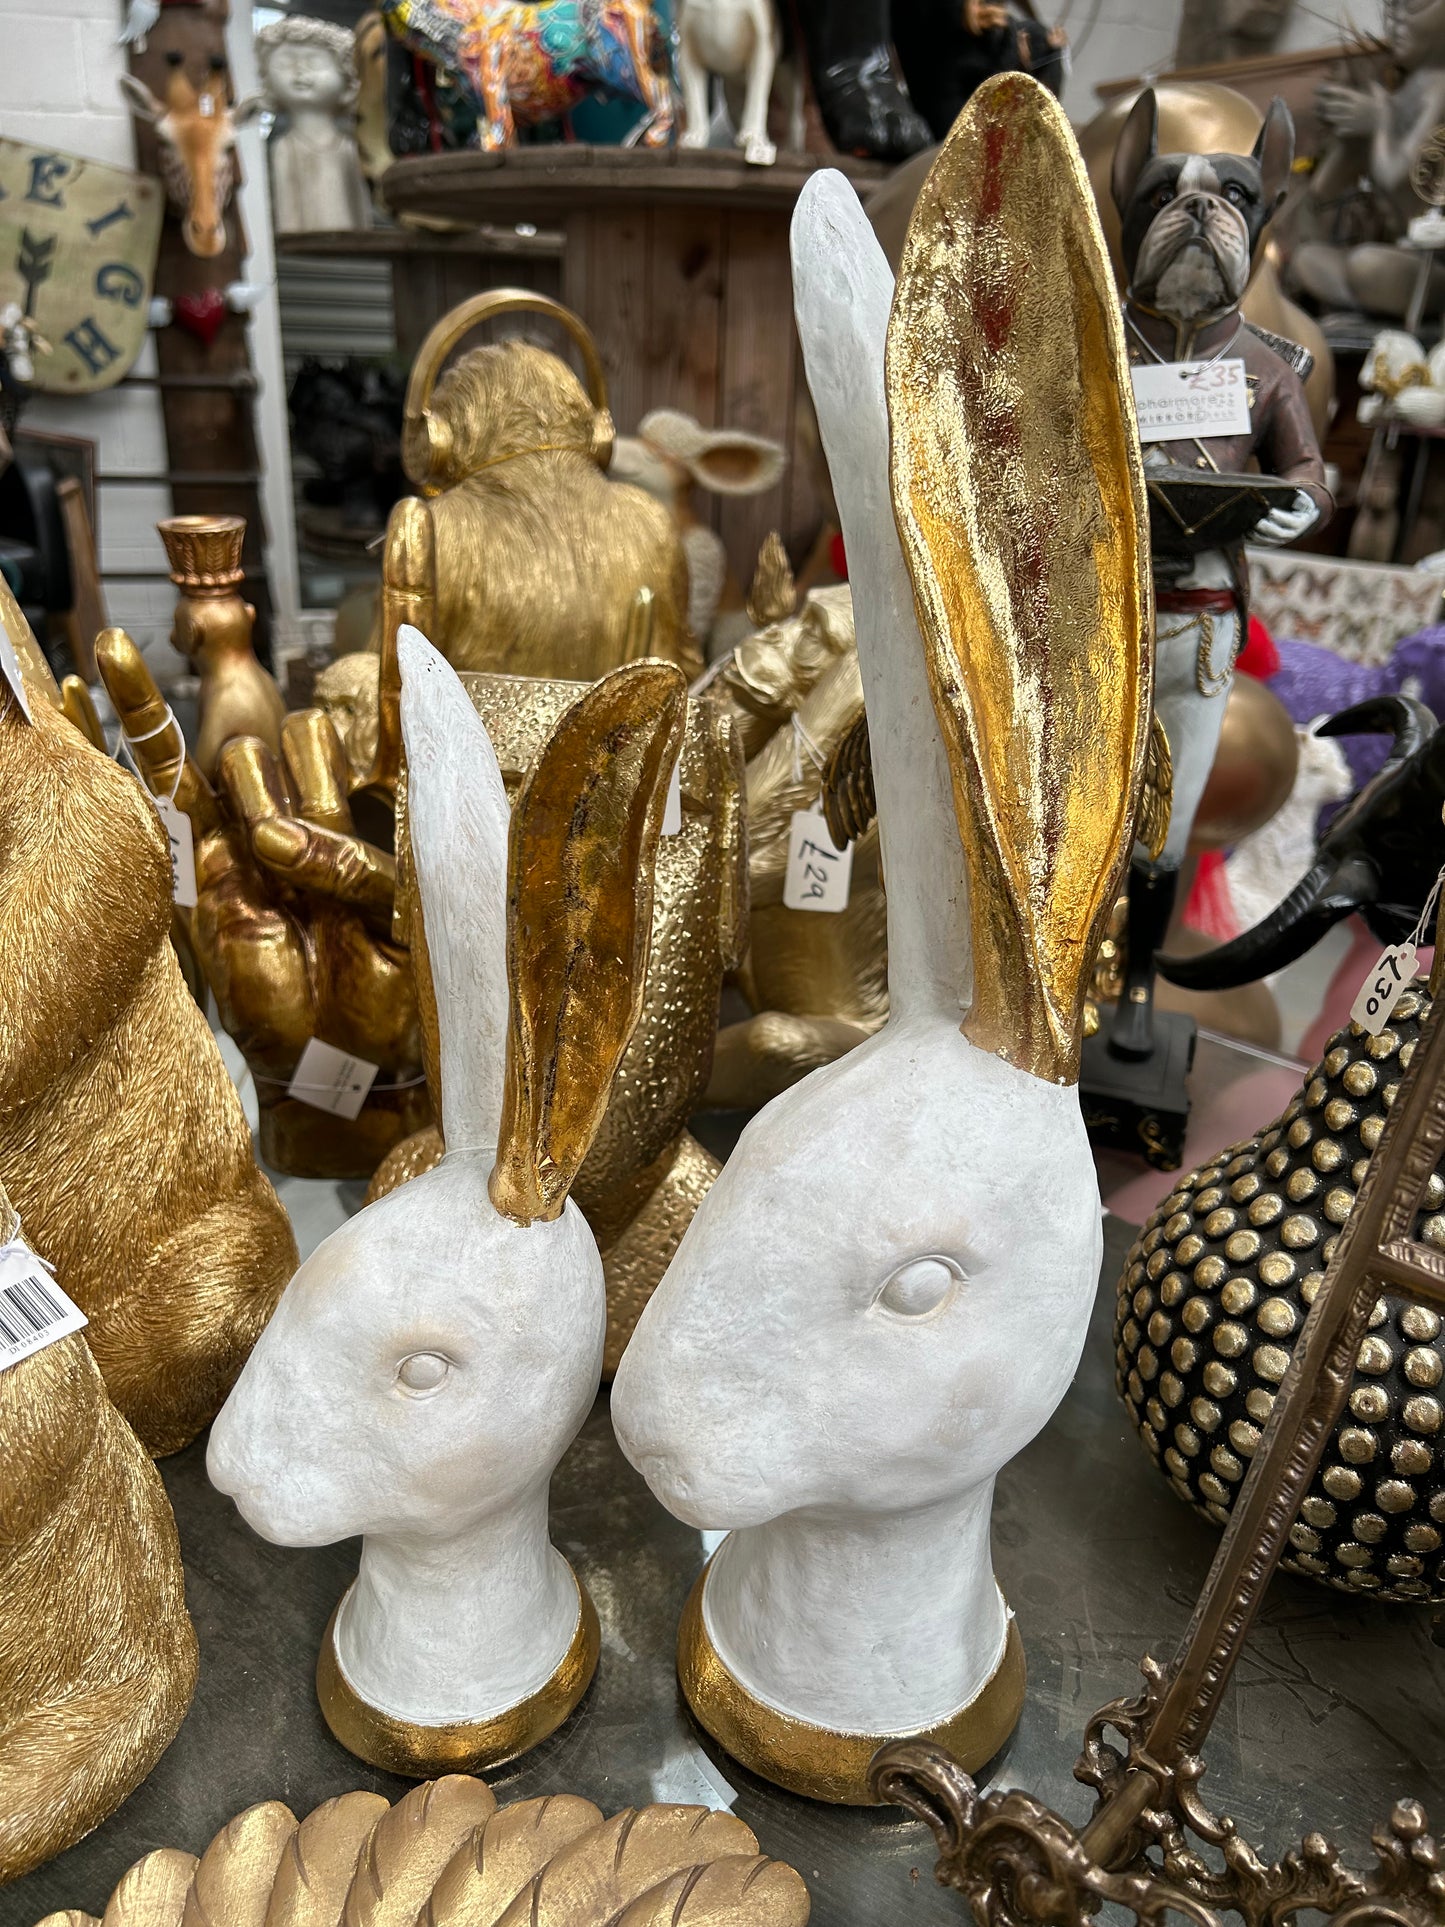 Sculpture White and Gold Hares set of 2